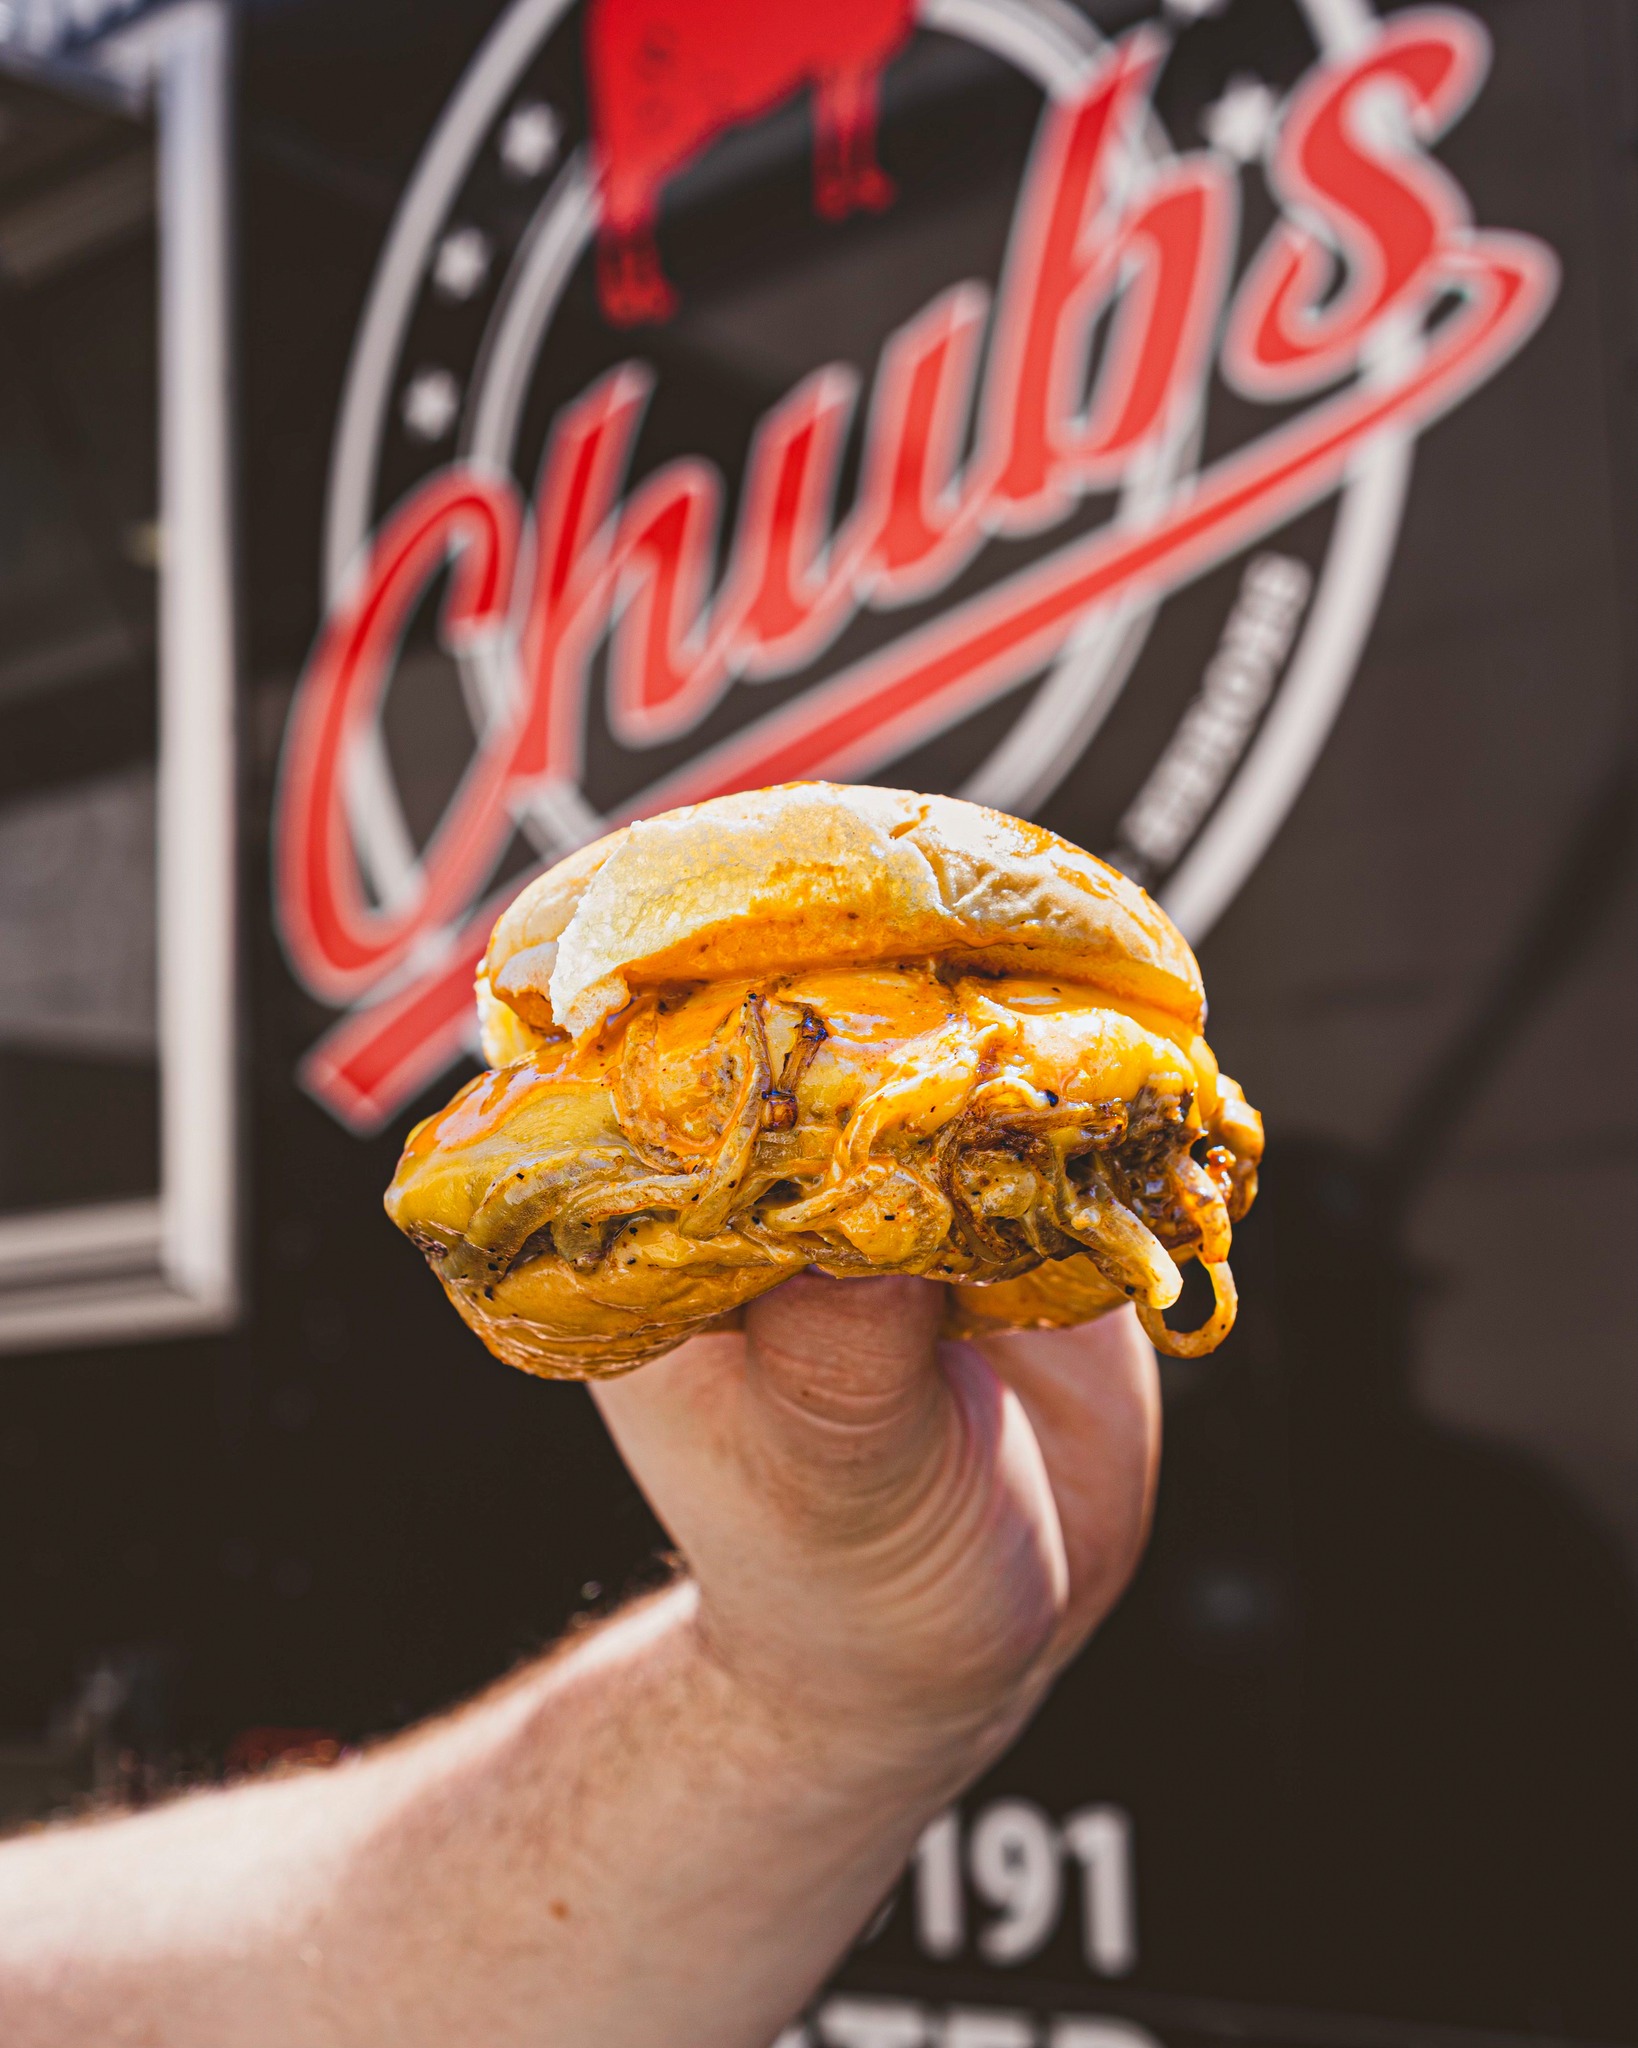 Delicious cheeseburger from Chubs Food Truck